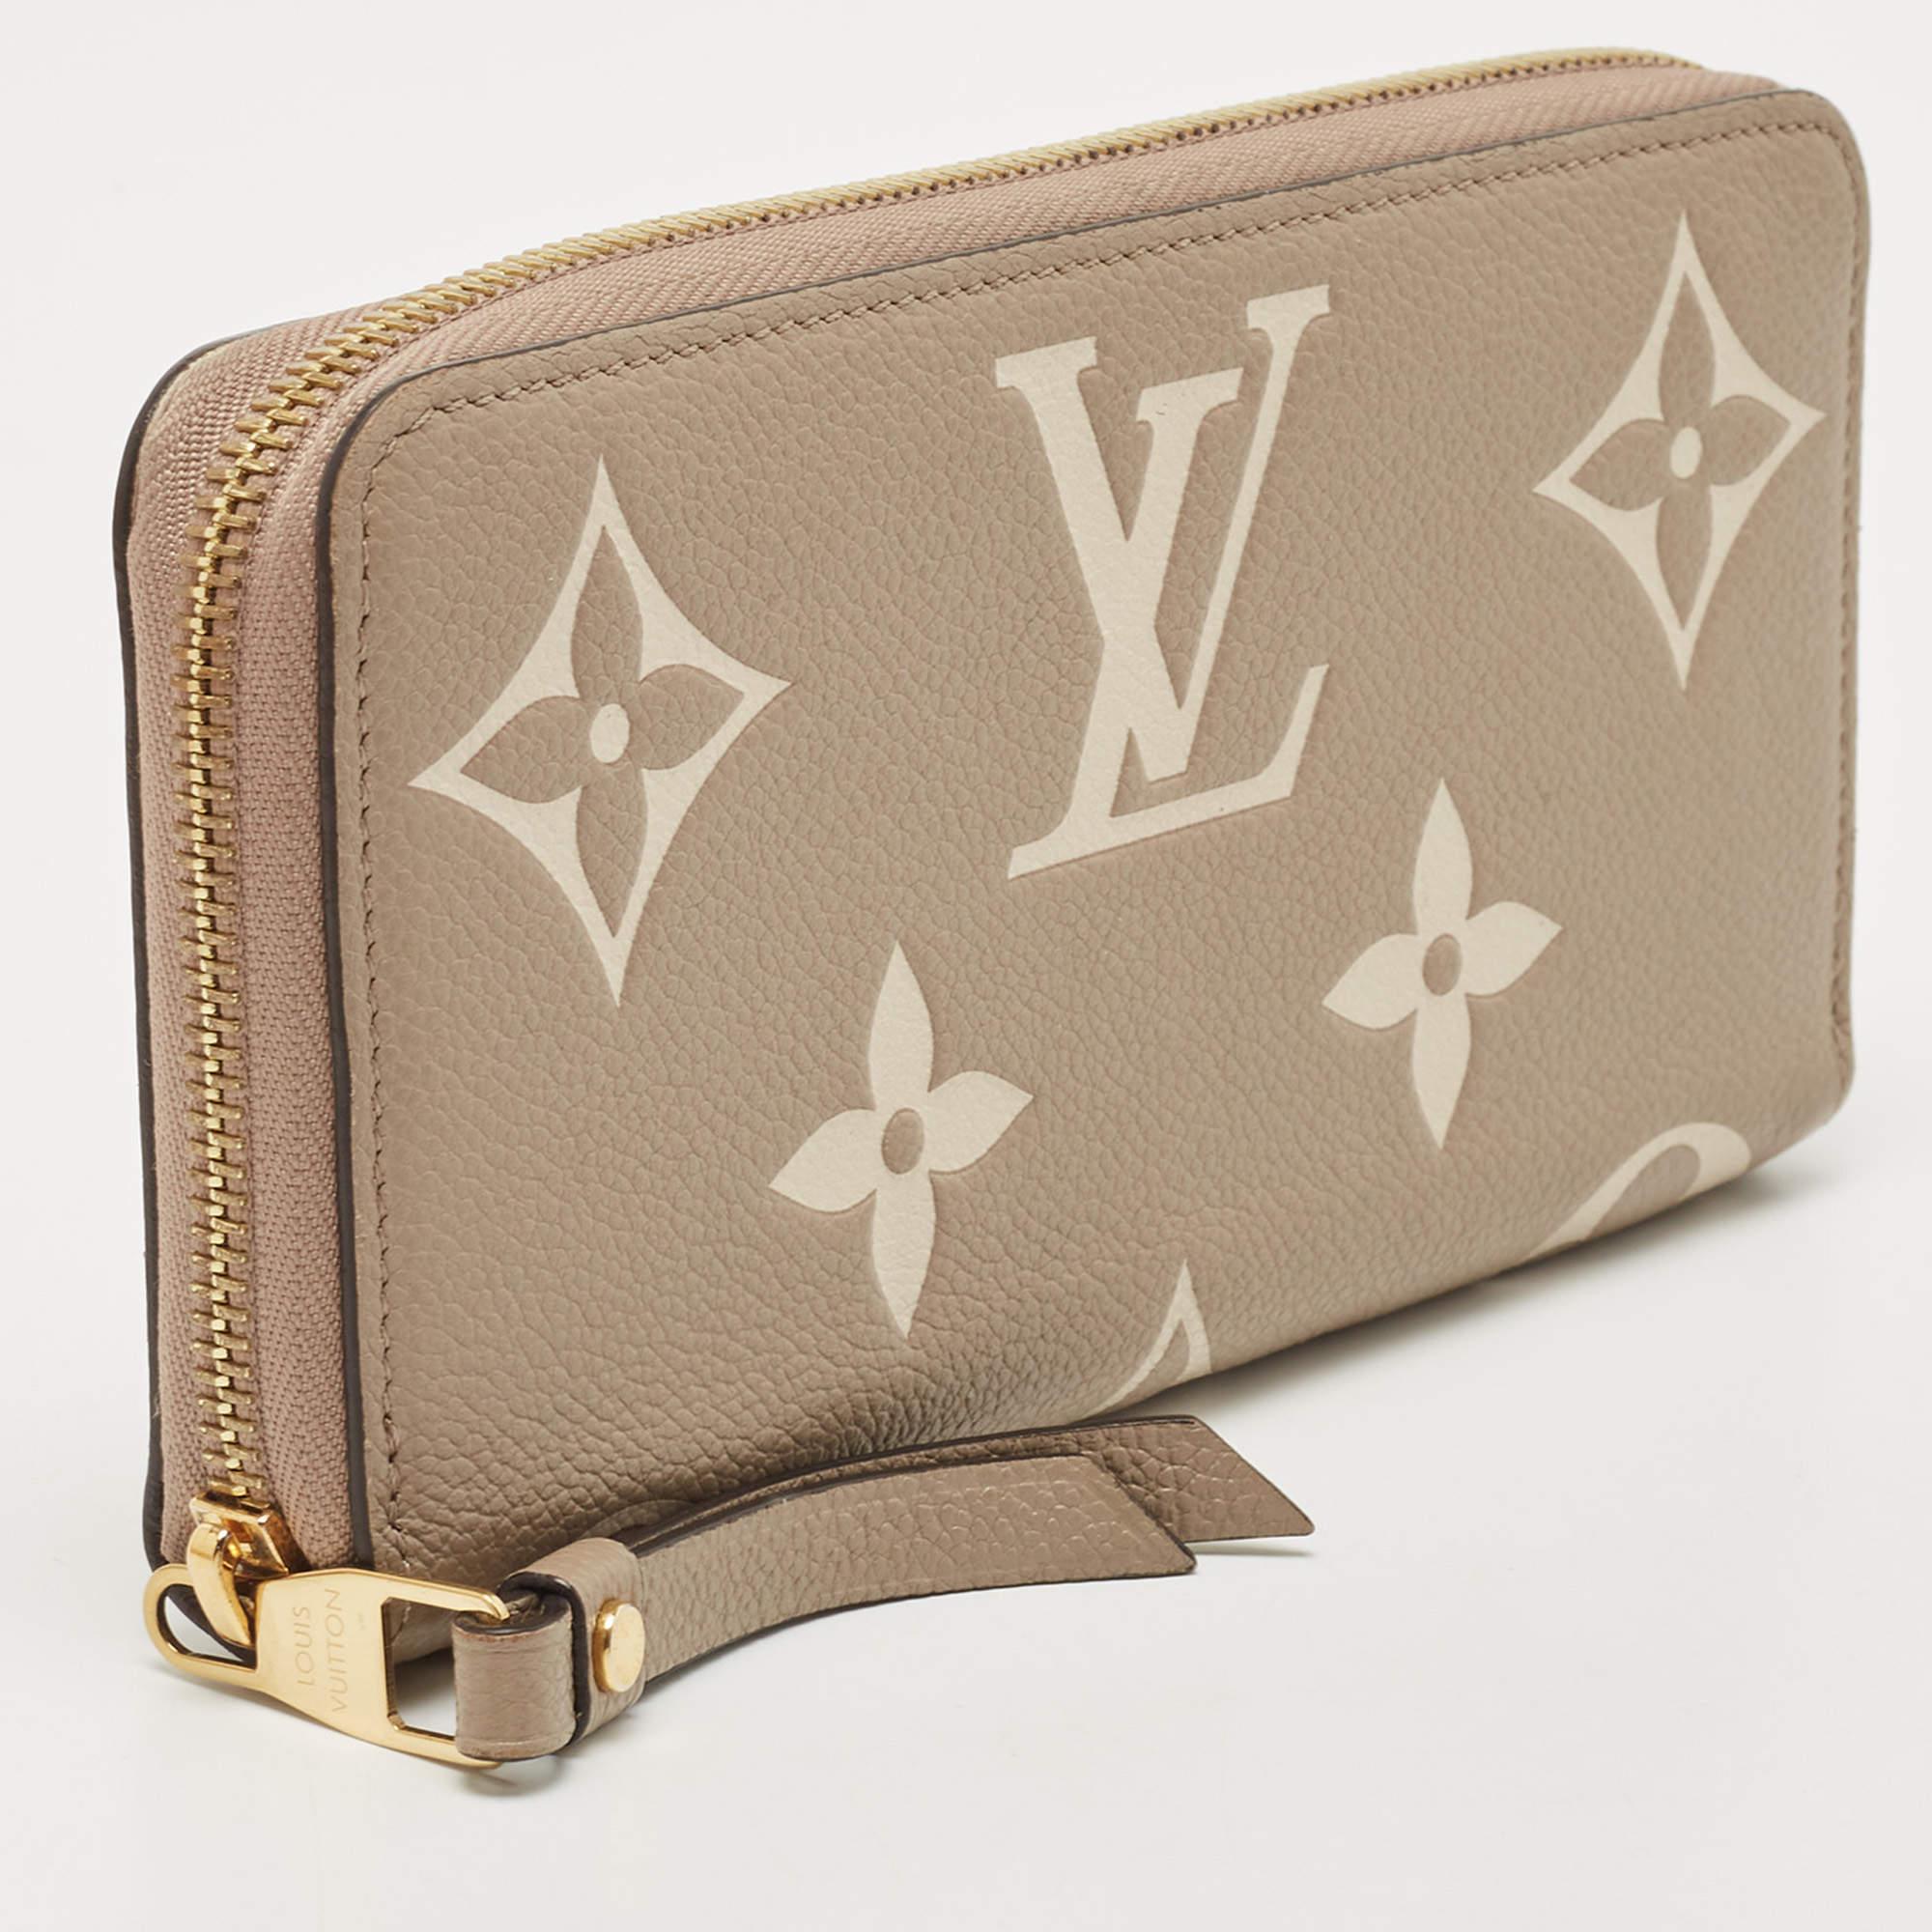 This wallet from Louis Vuitton brings along a touch of luxury and immense style. It comes crafted from Monogram Empreinte leather and is secured by a zipper.

Includes: Original Dustbag, Original Box

